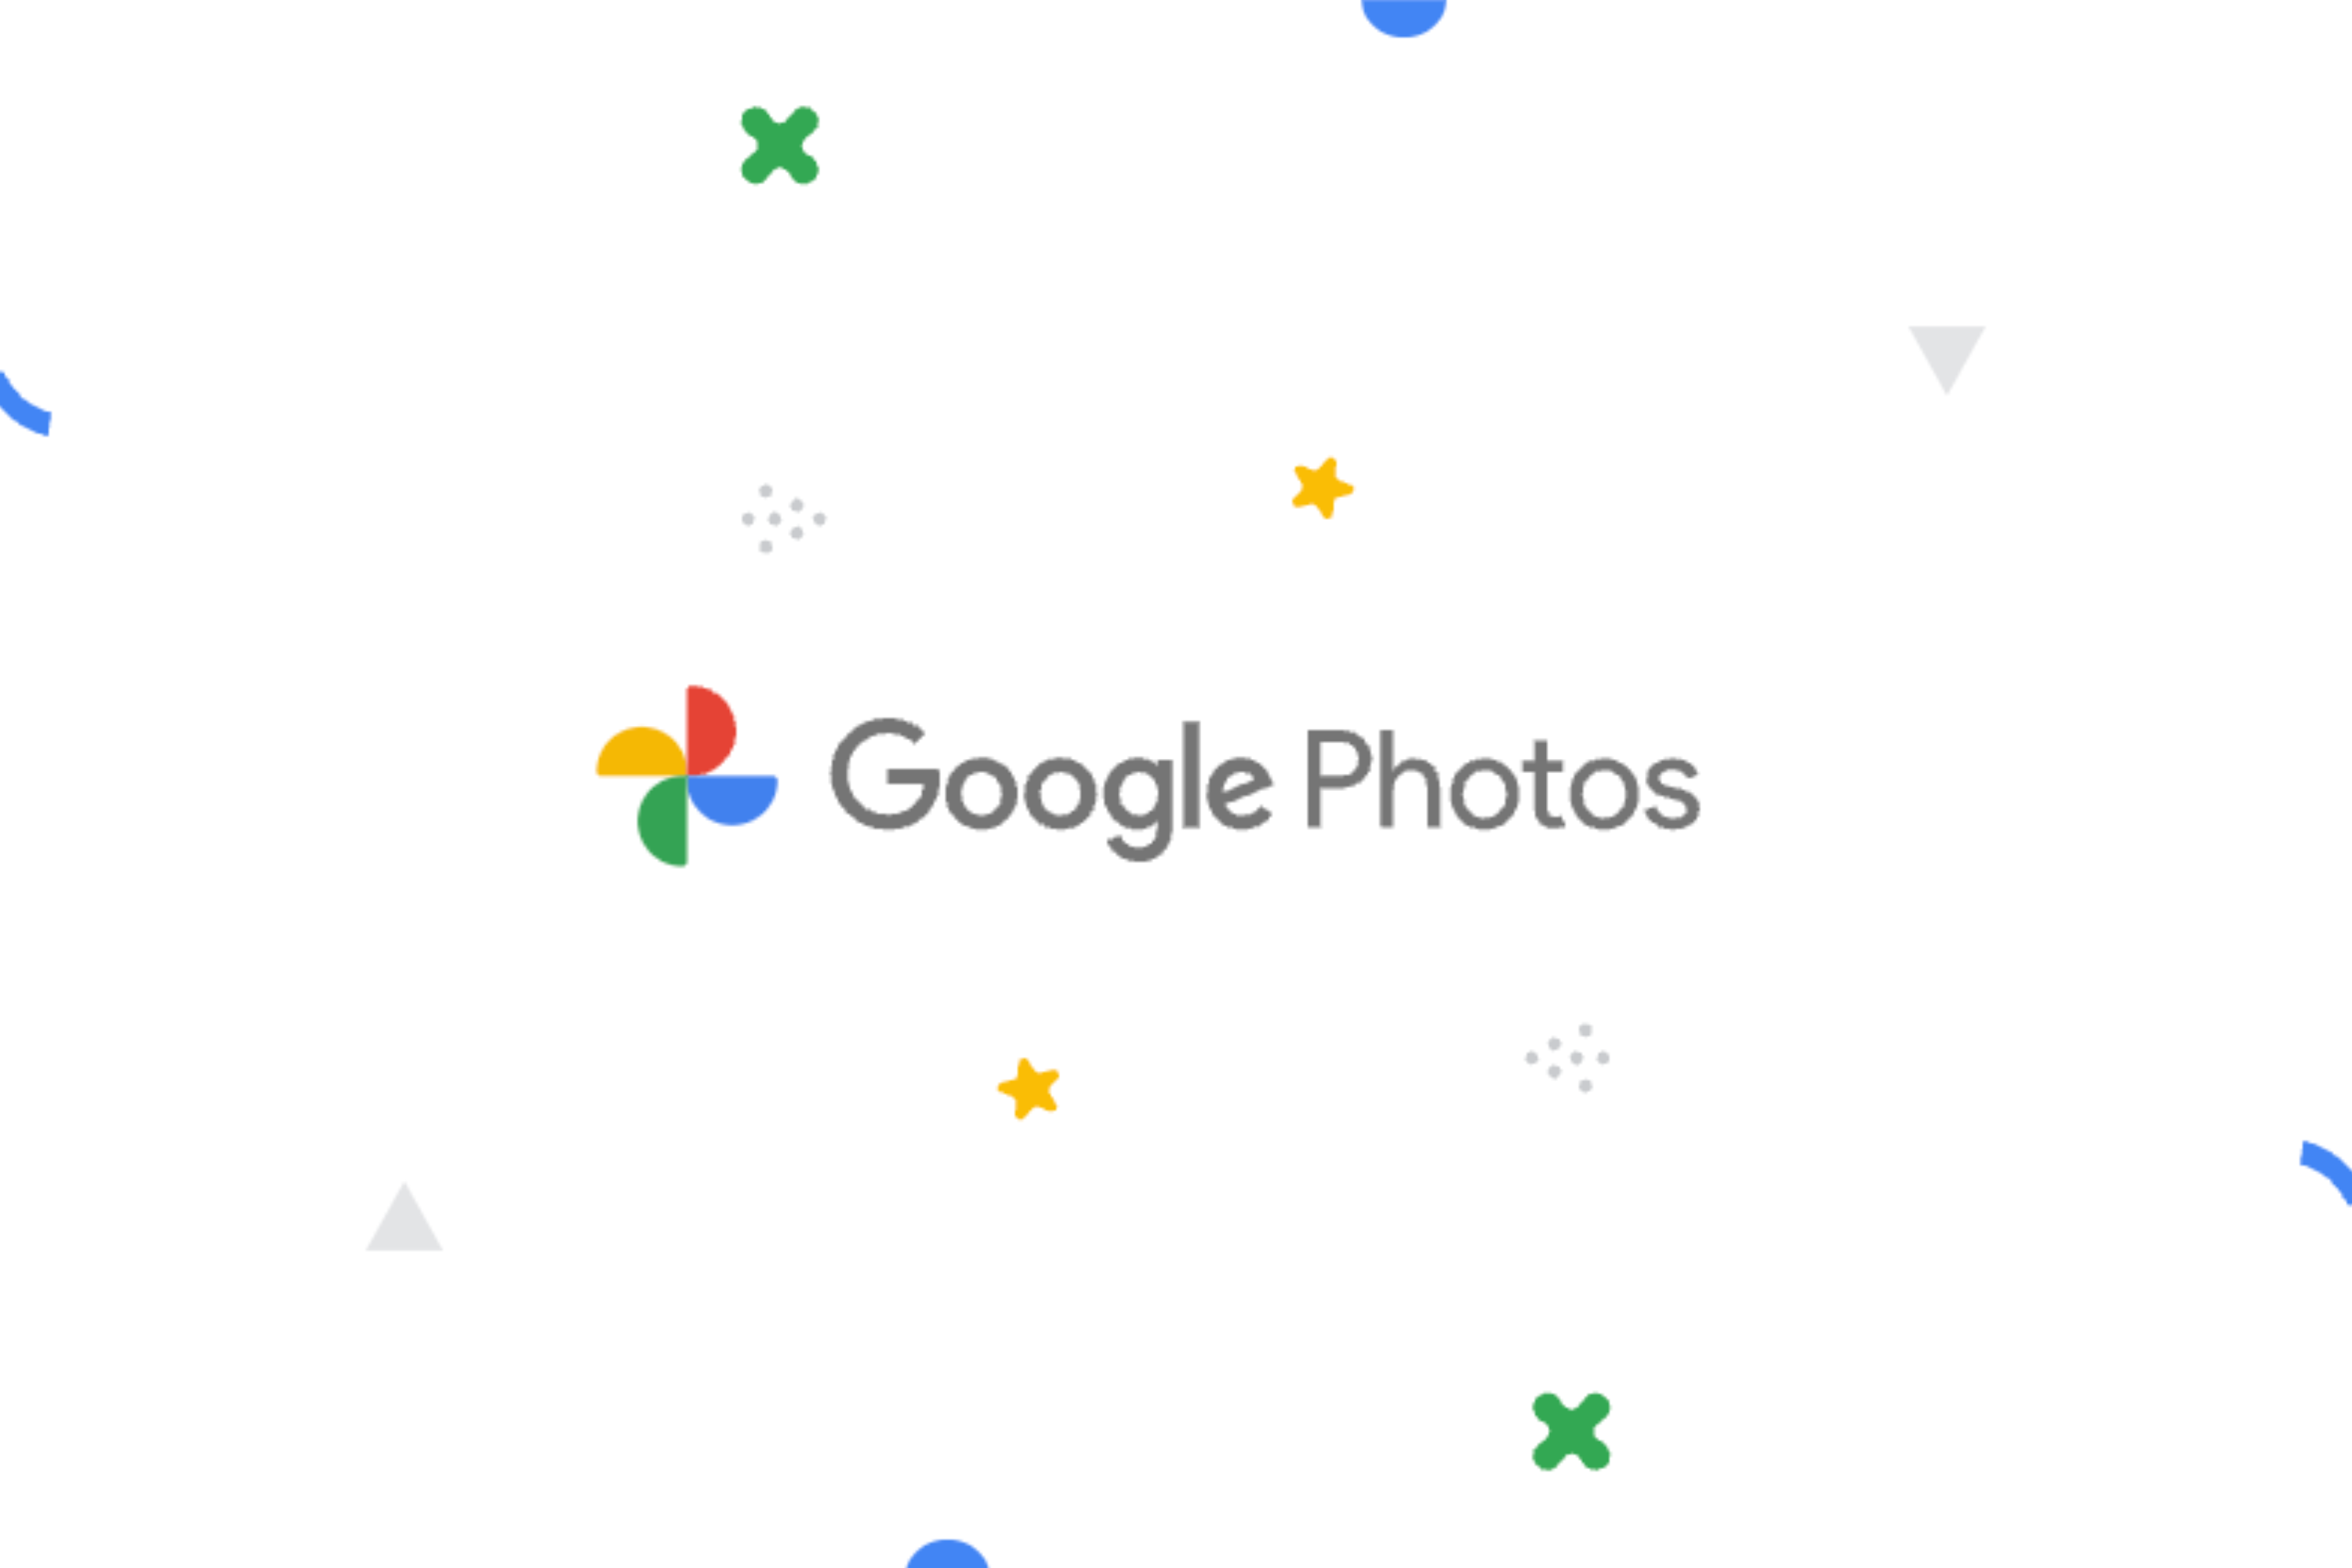 Google Photos logo with shapes like X, star, triangle, and dots